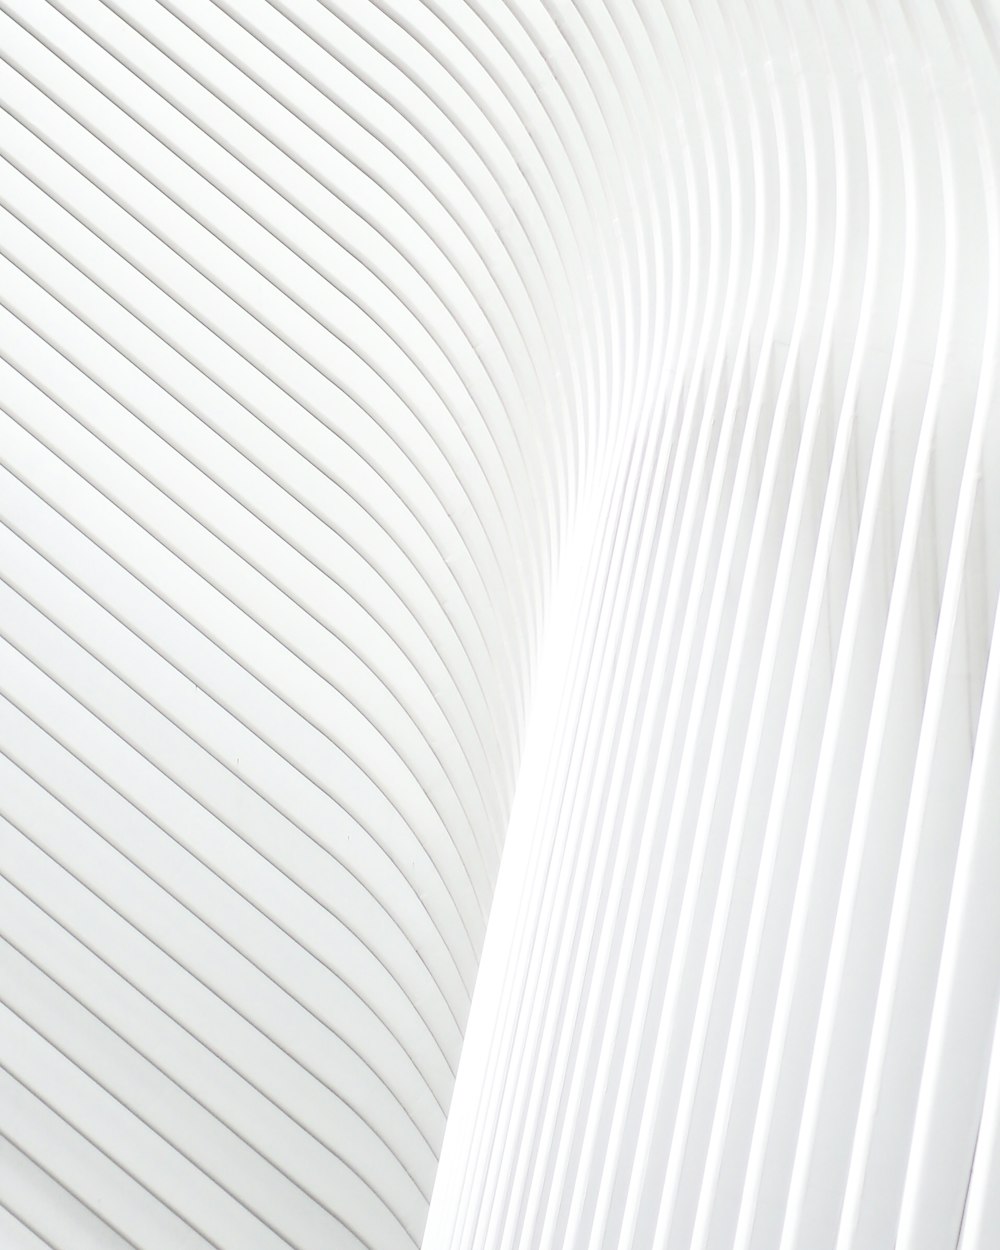 A close up of a white wall with wavy lines photo – Free White Image on ...